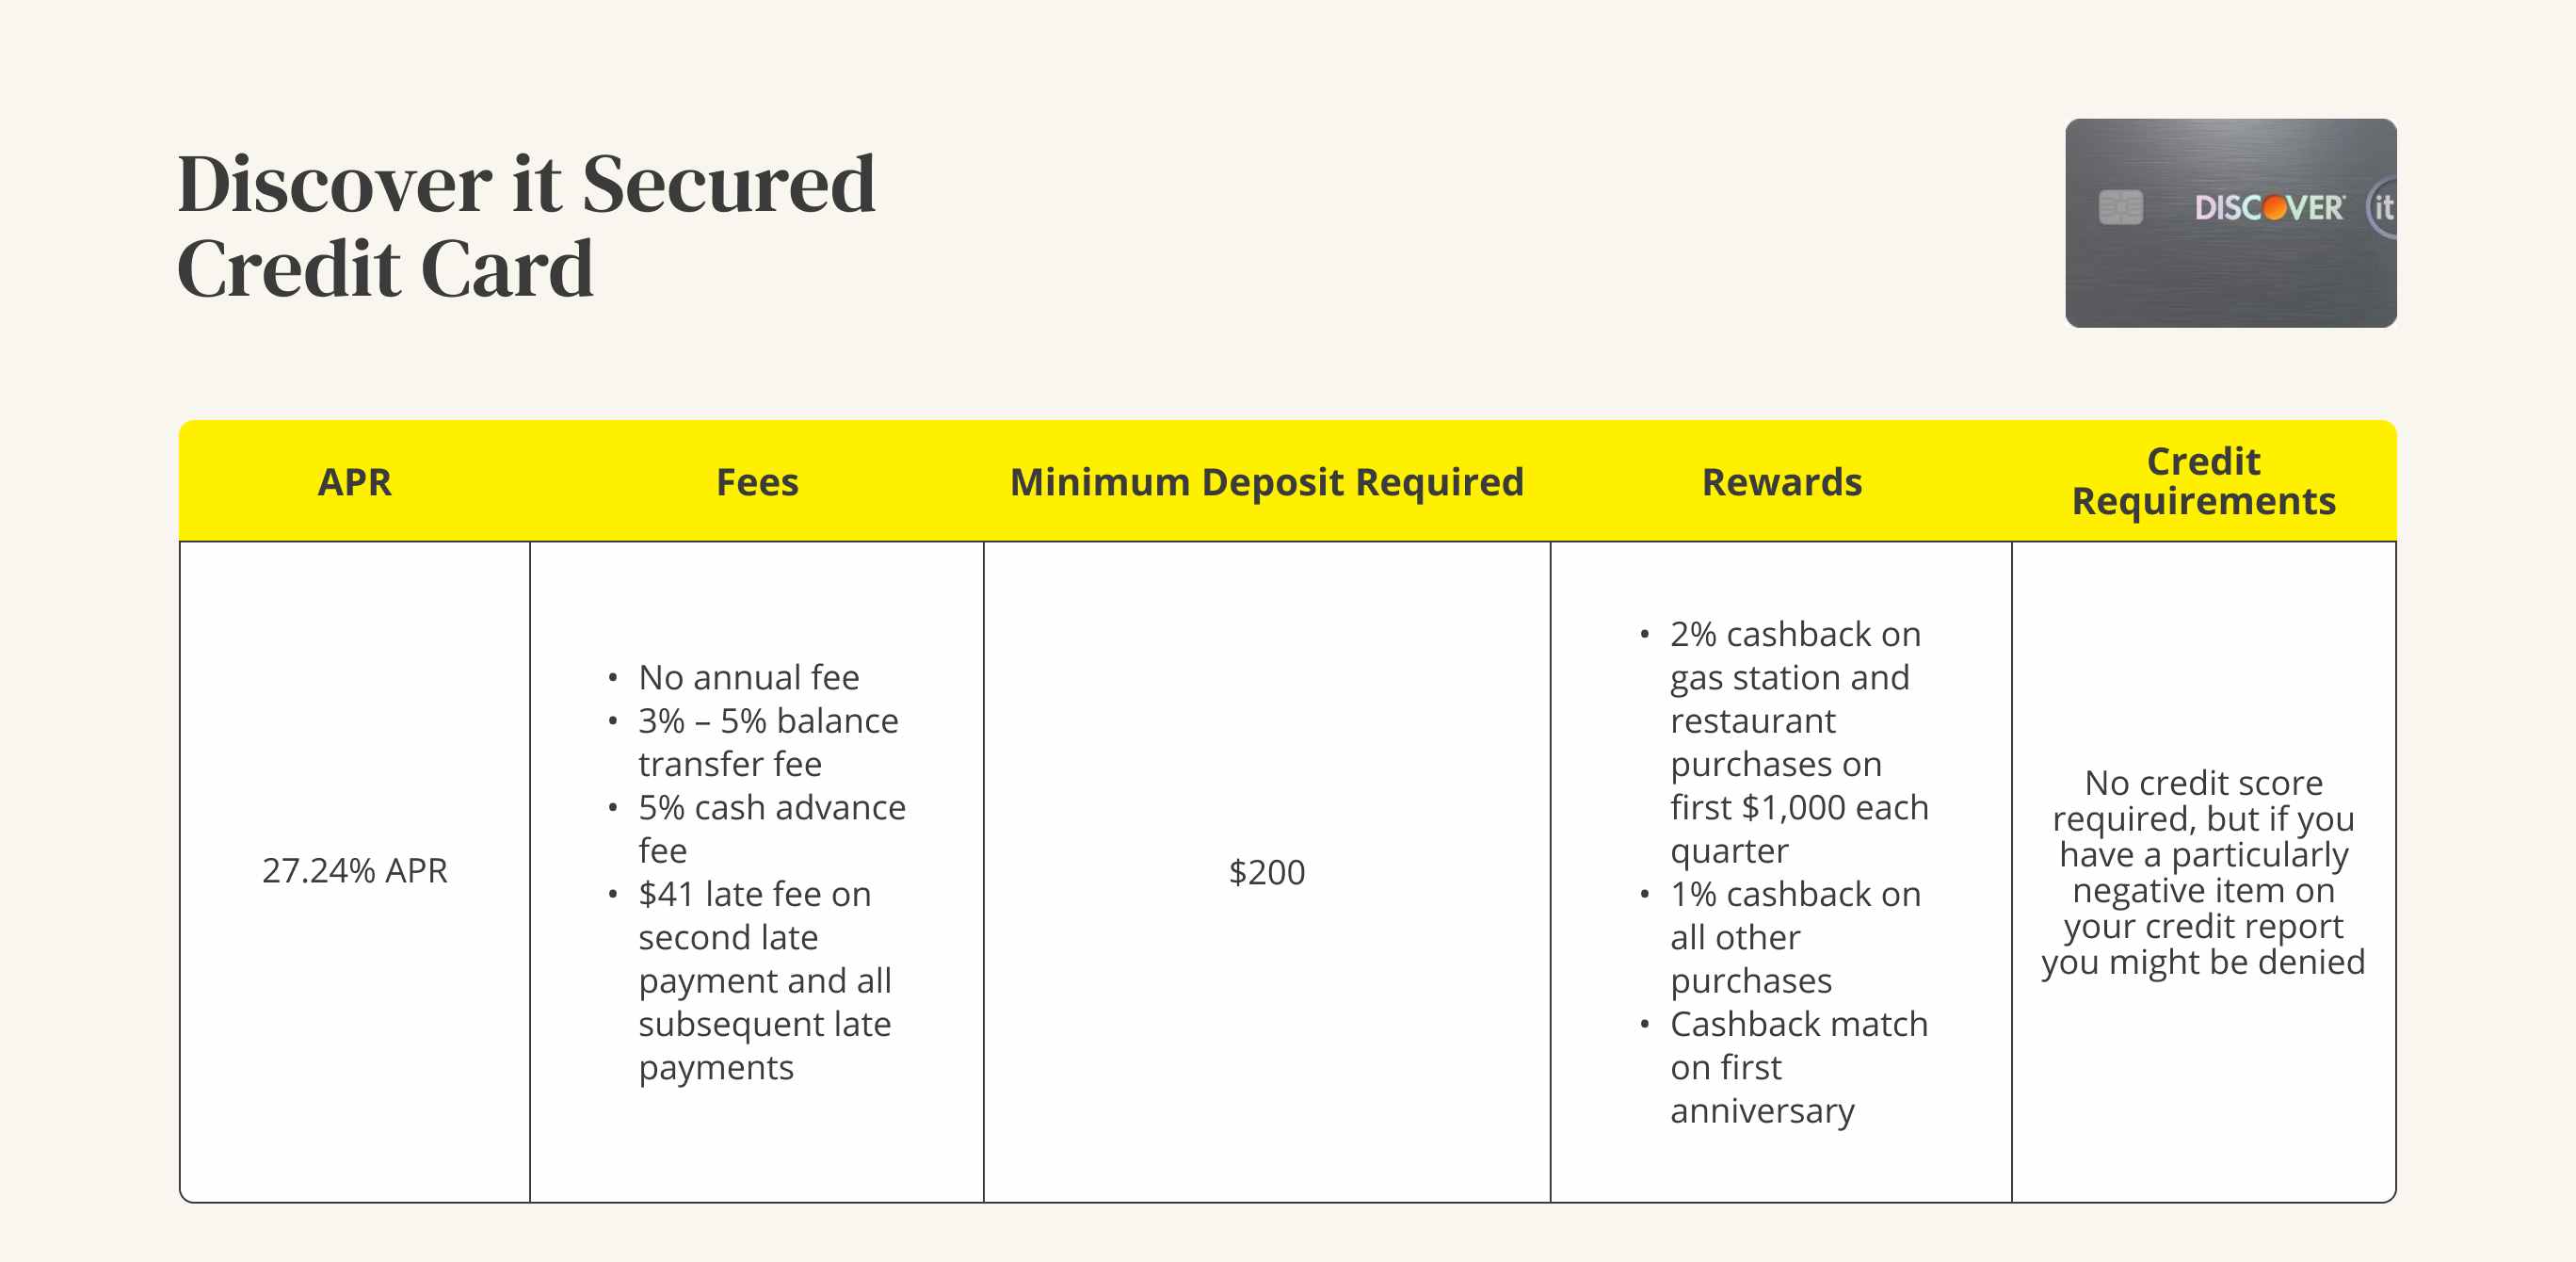 A graphic showing the APR, fees, minimum deposit, rewards, and credit requirements for a Discover it Secured credit card